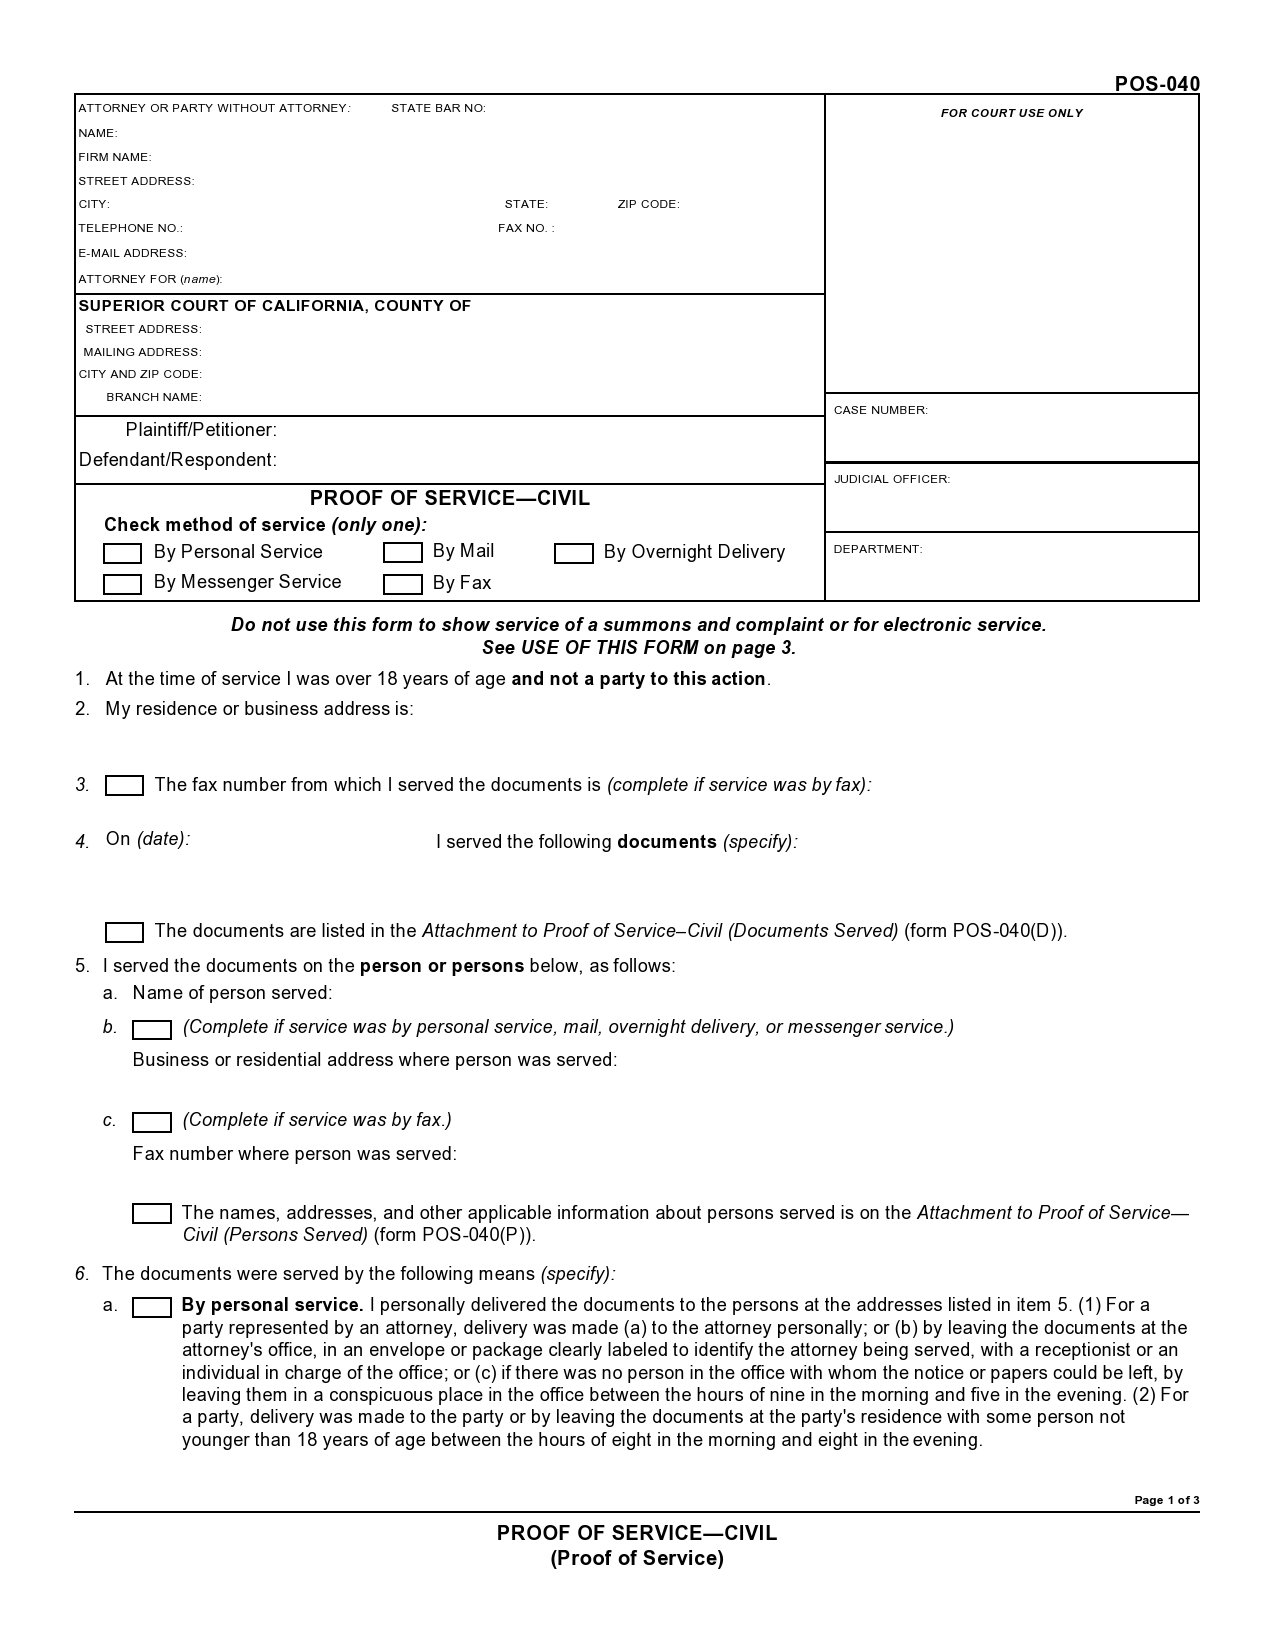 Free proof of service form 03